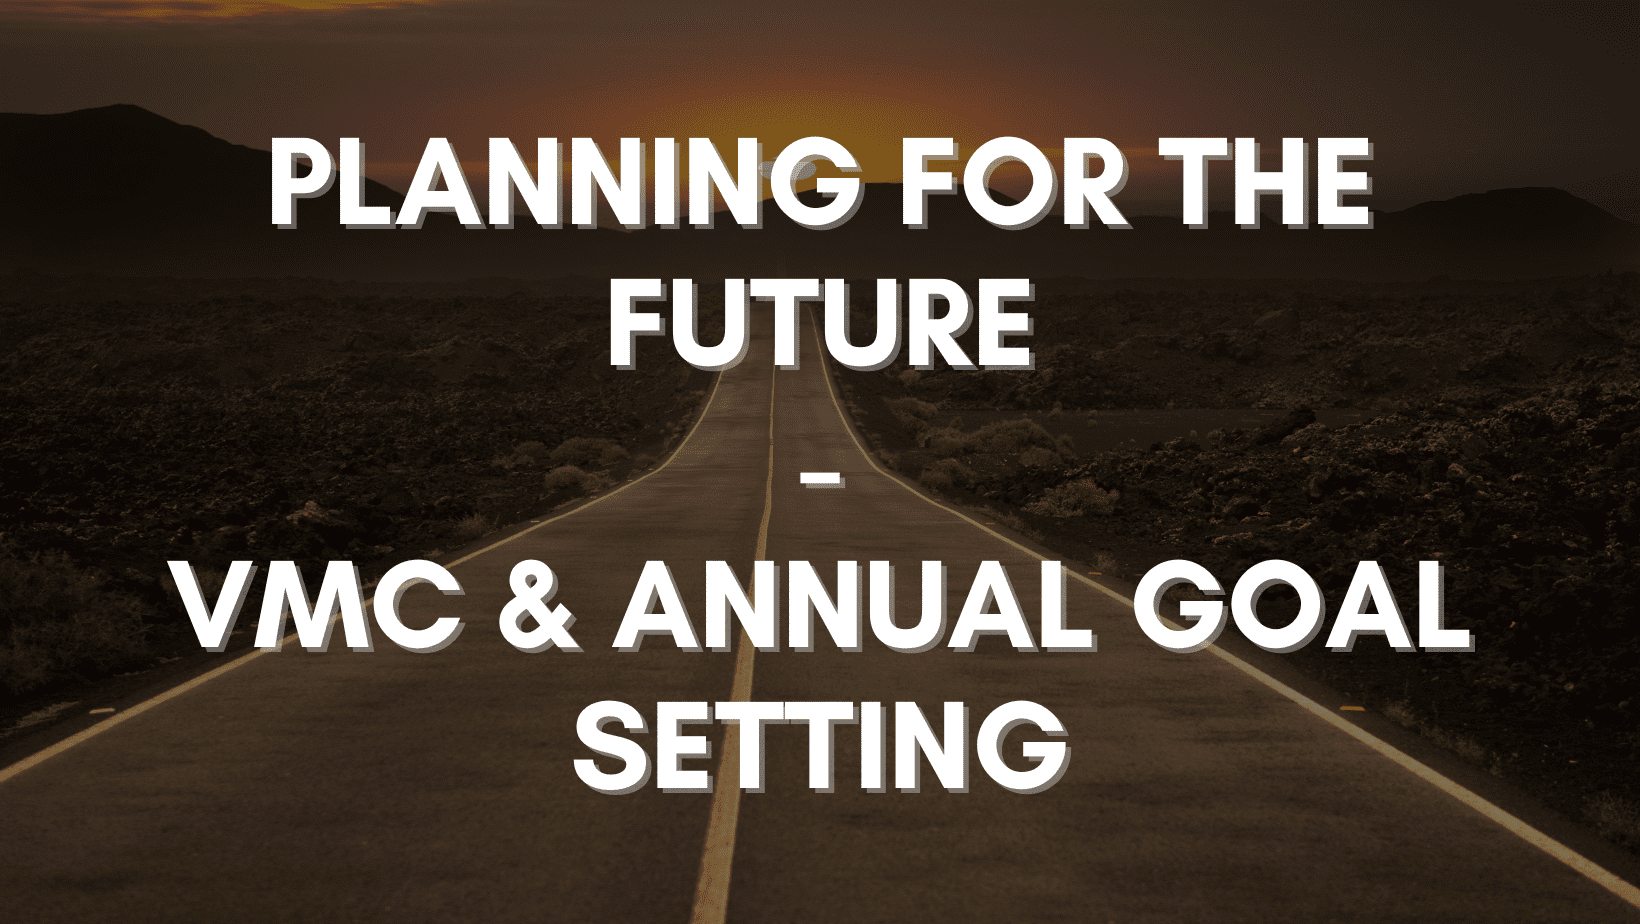 A motivational poster featuring a road at sunset with the text "annual planning & VMC - setting goals for the future" overlaying the image.